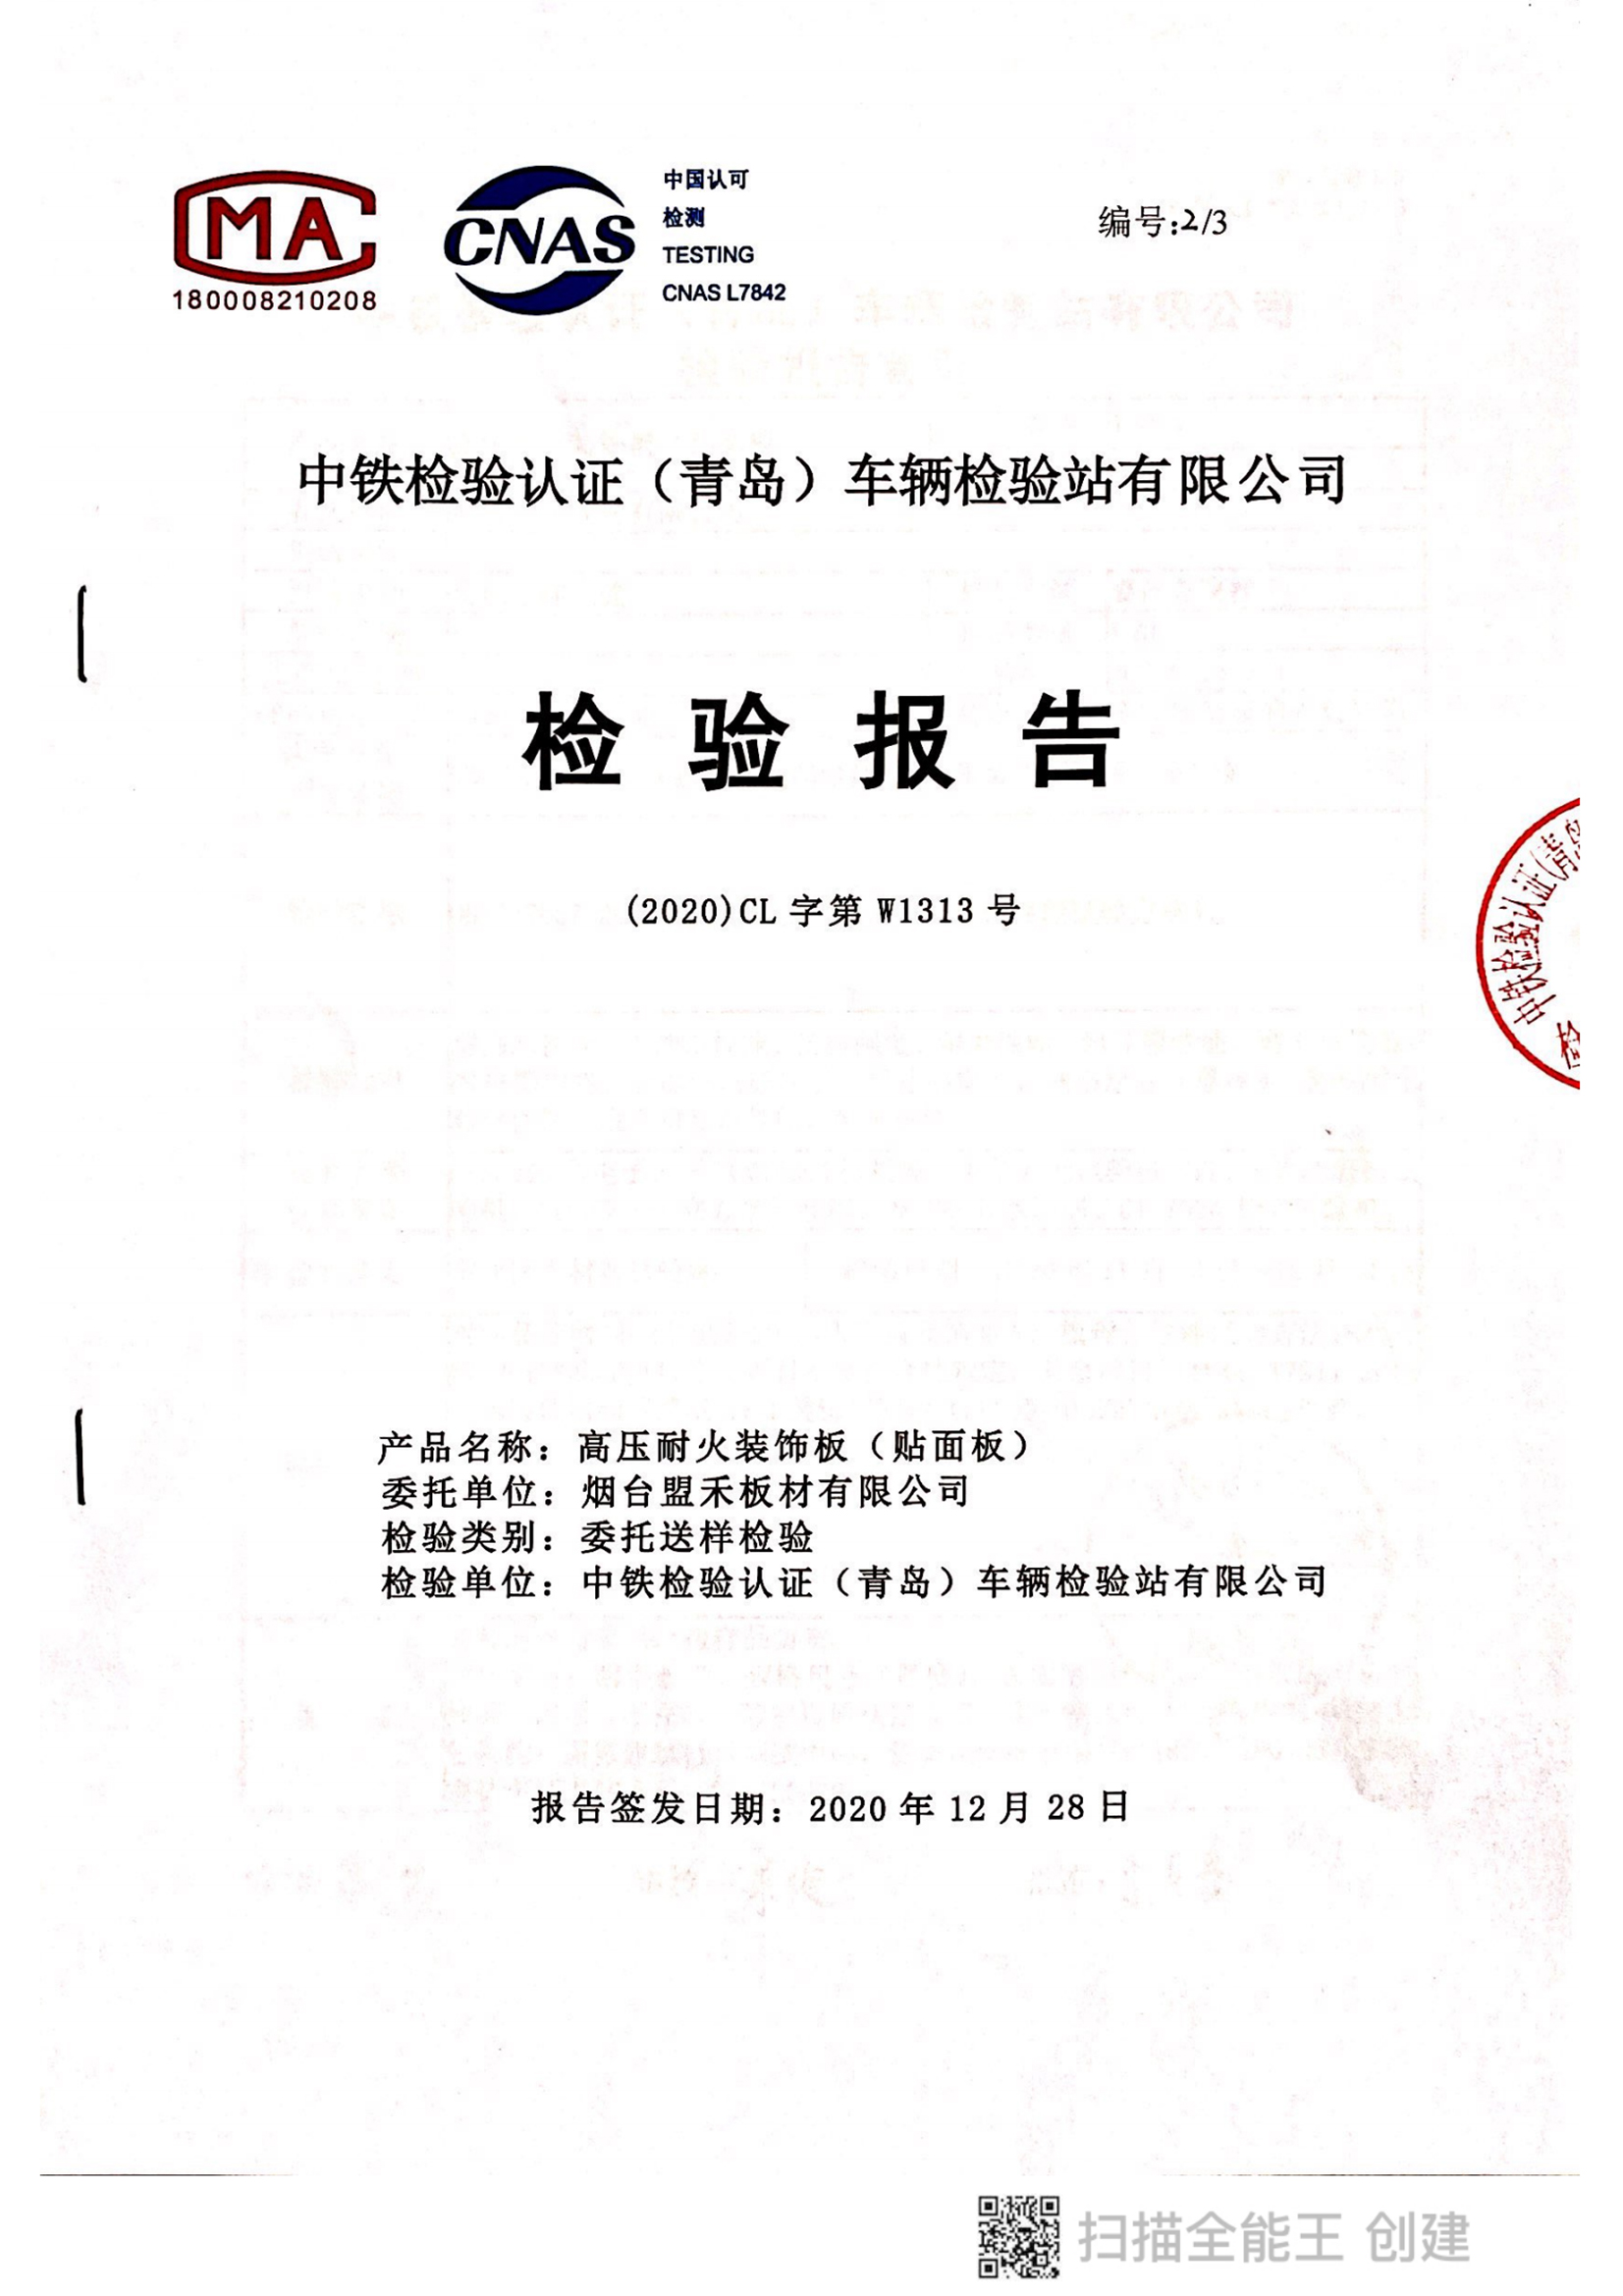 China railway inspection report